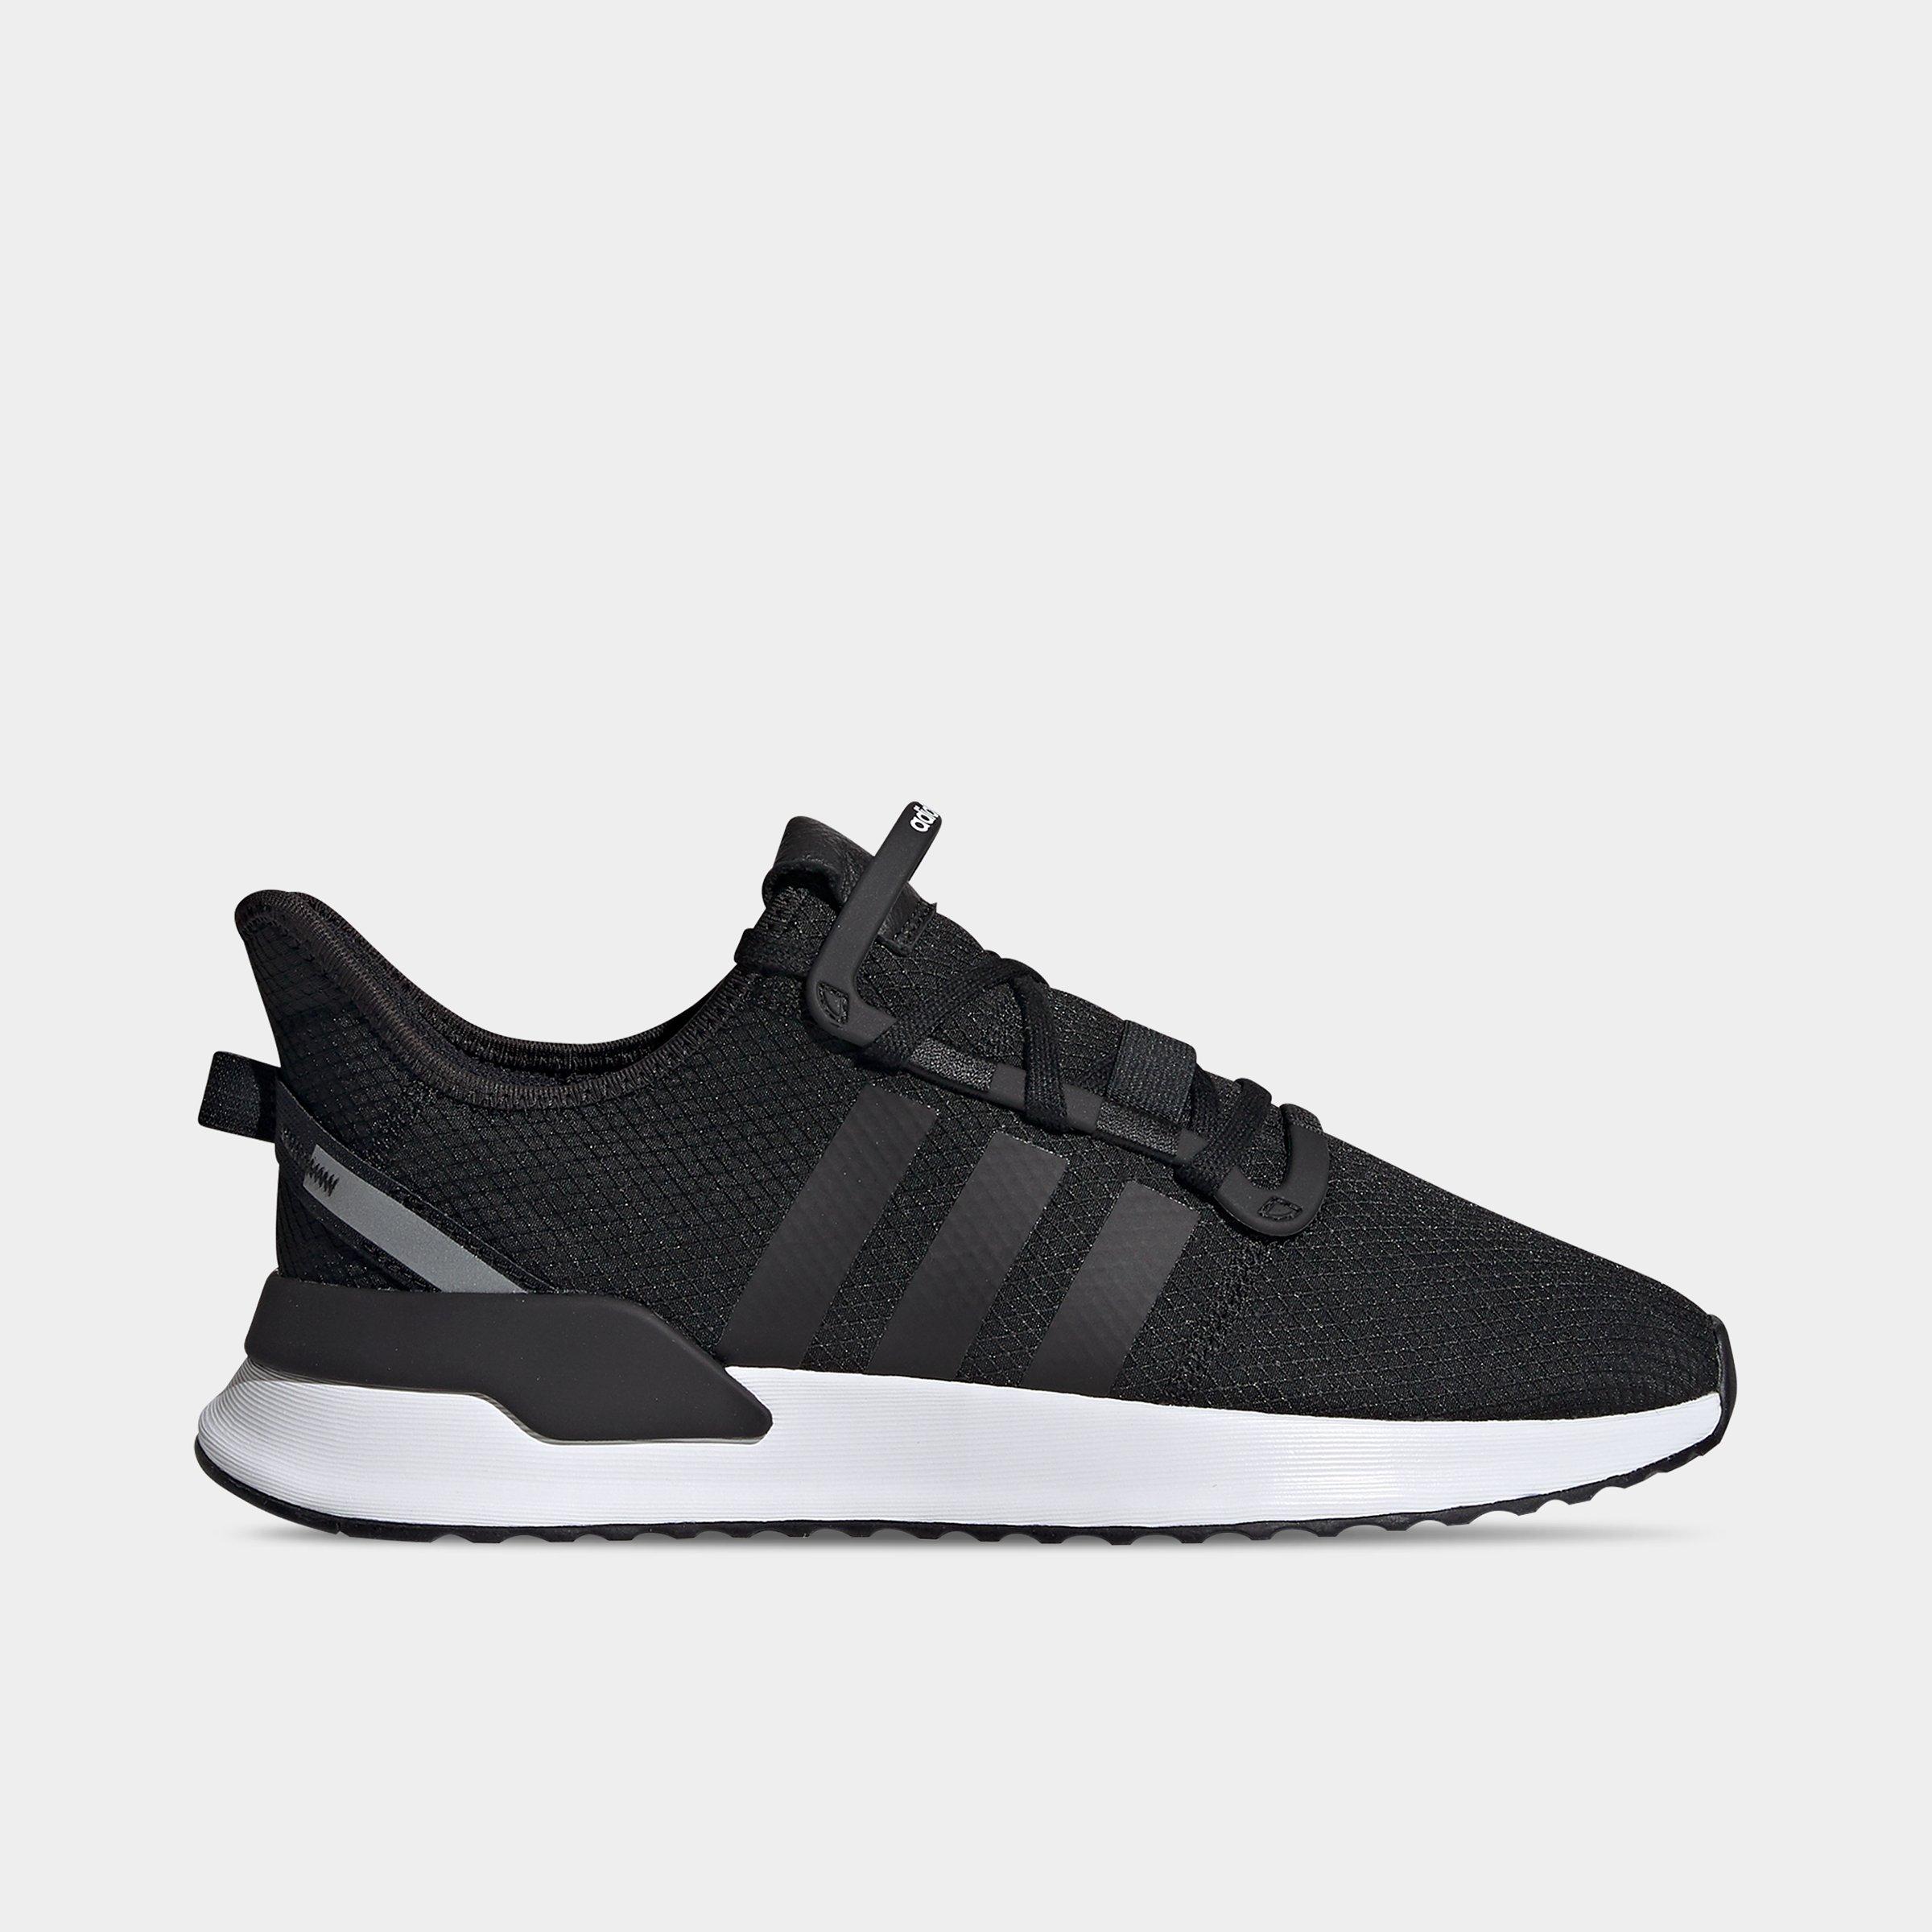 adidas latest casual shoes